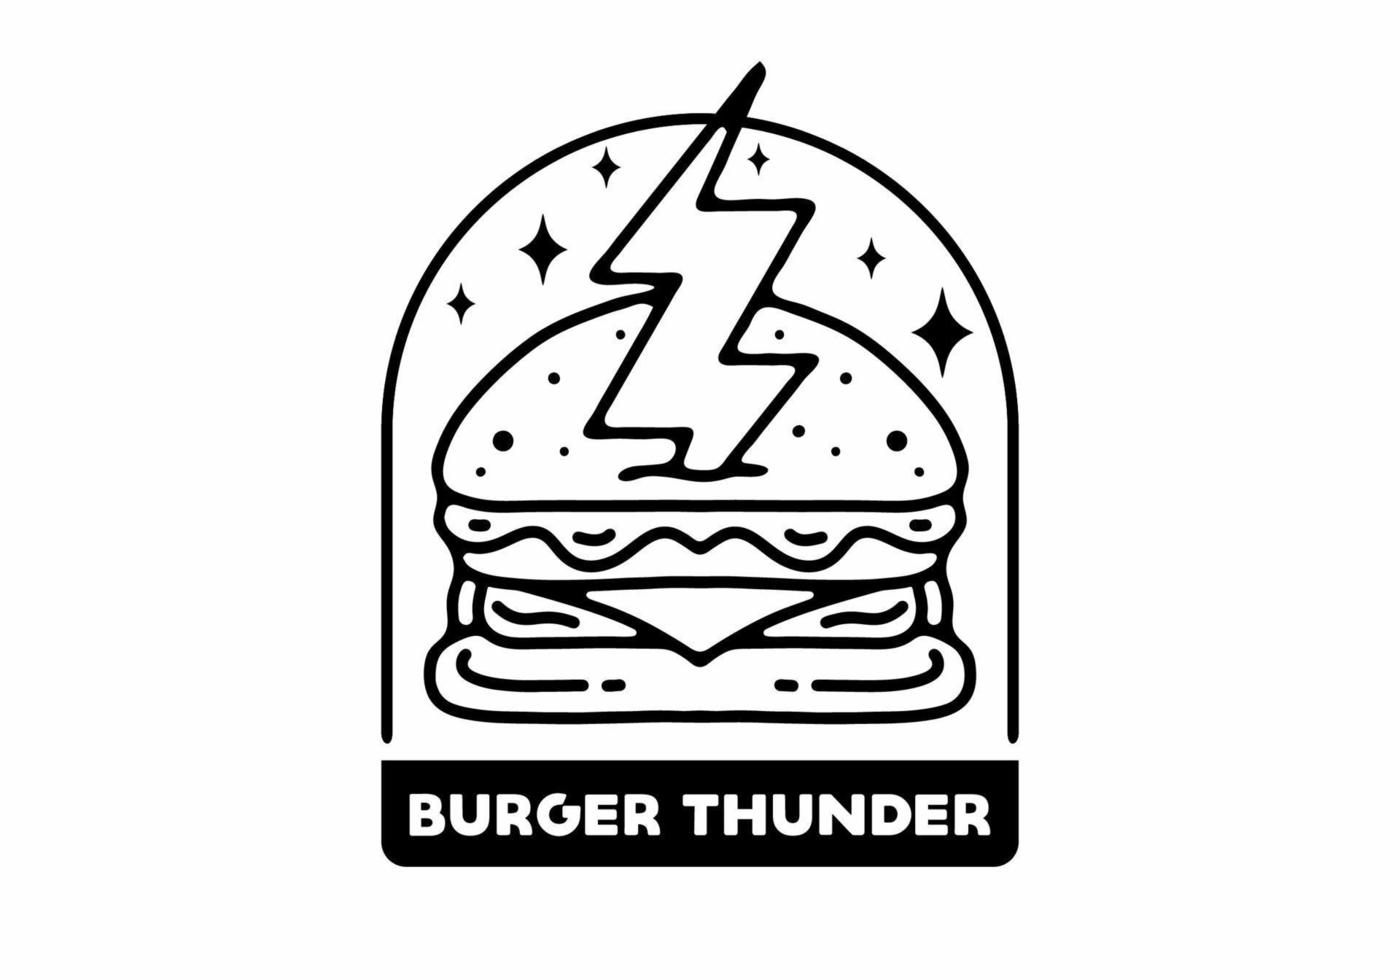 illustration design of the burger and thunder tattoo vector